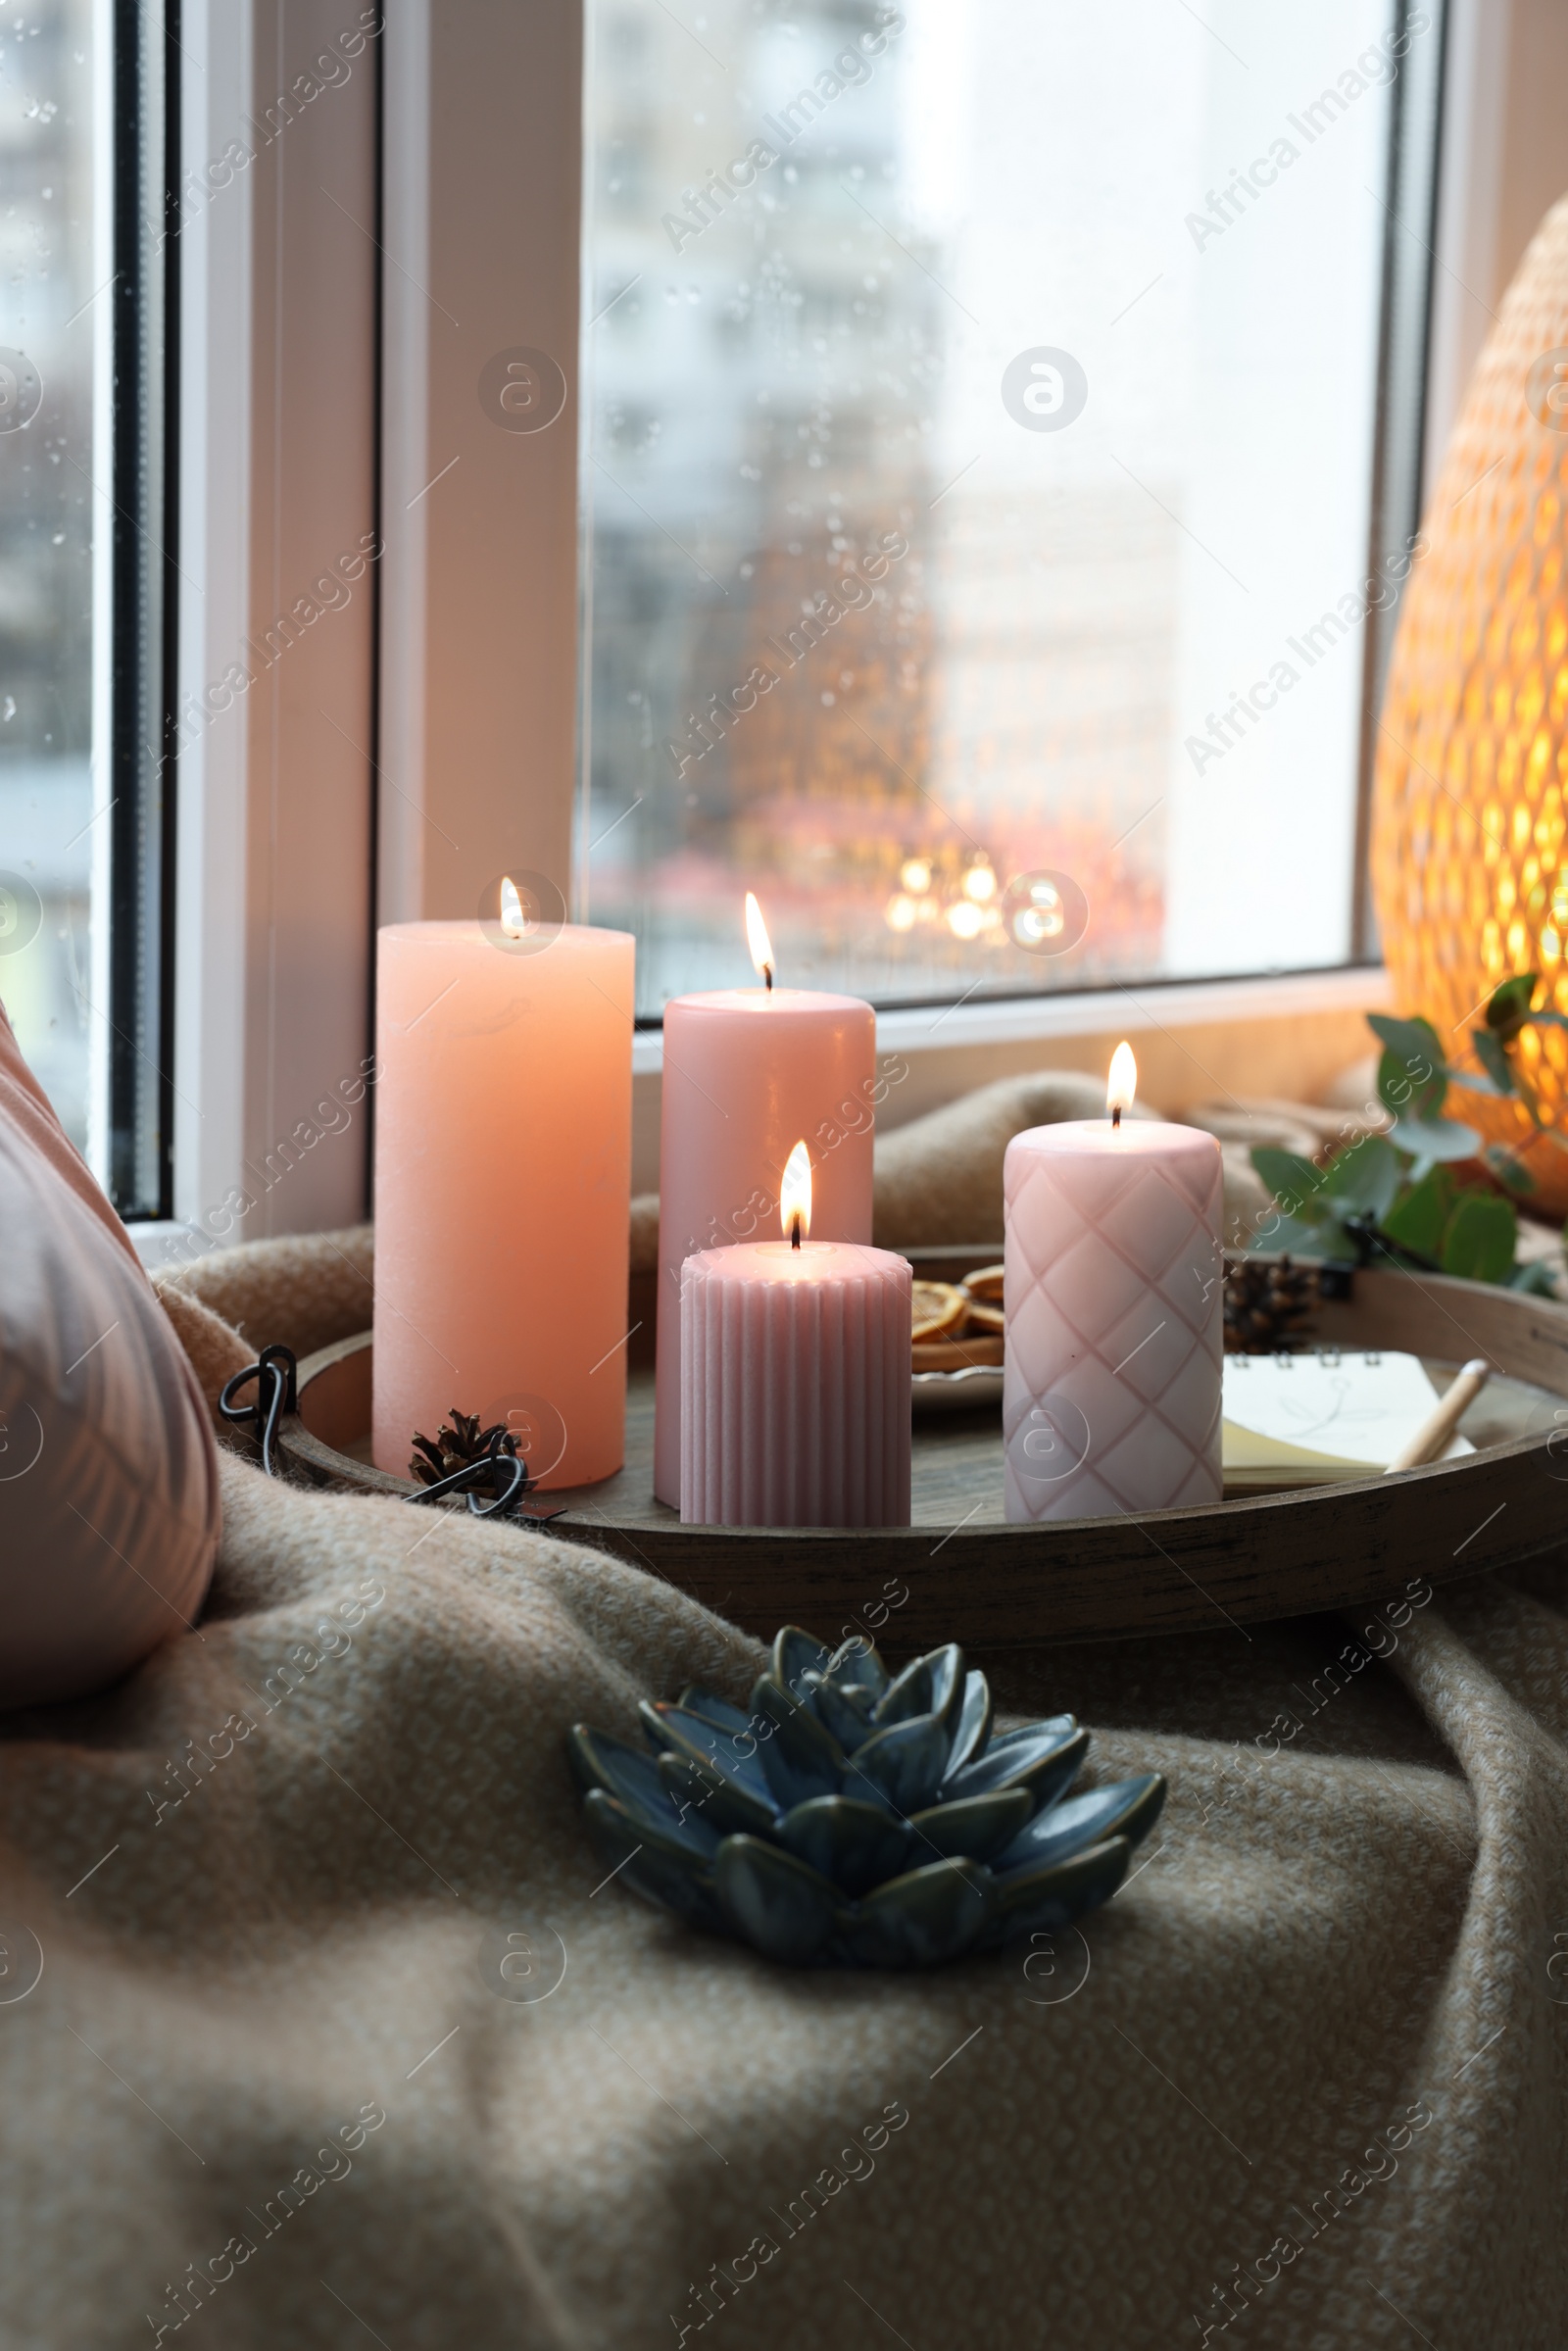 Photo of Tray with burning wax candles and decor on window sill indoors